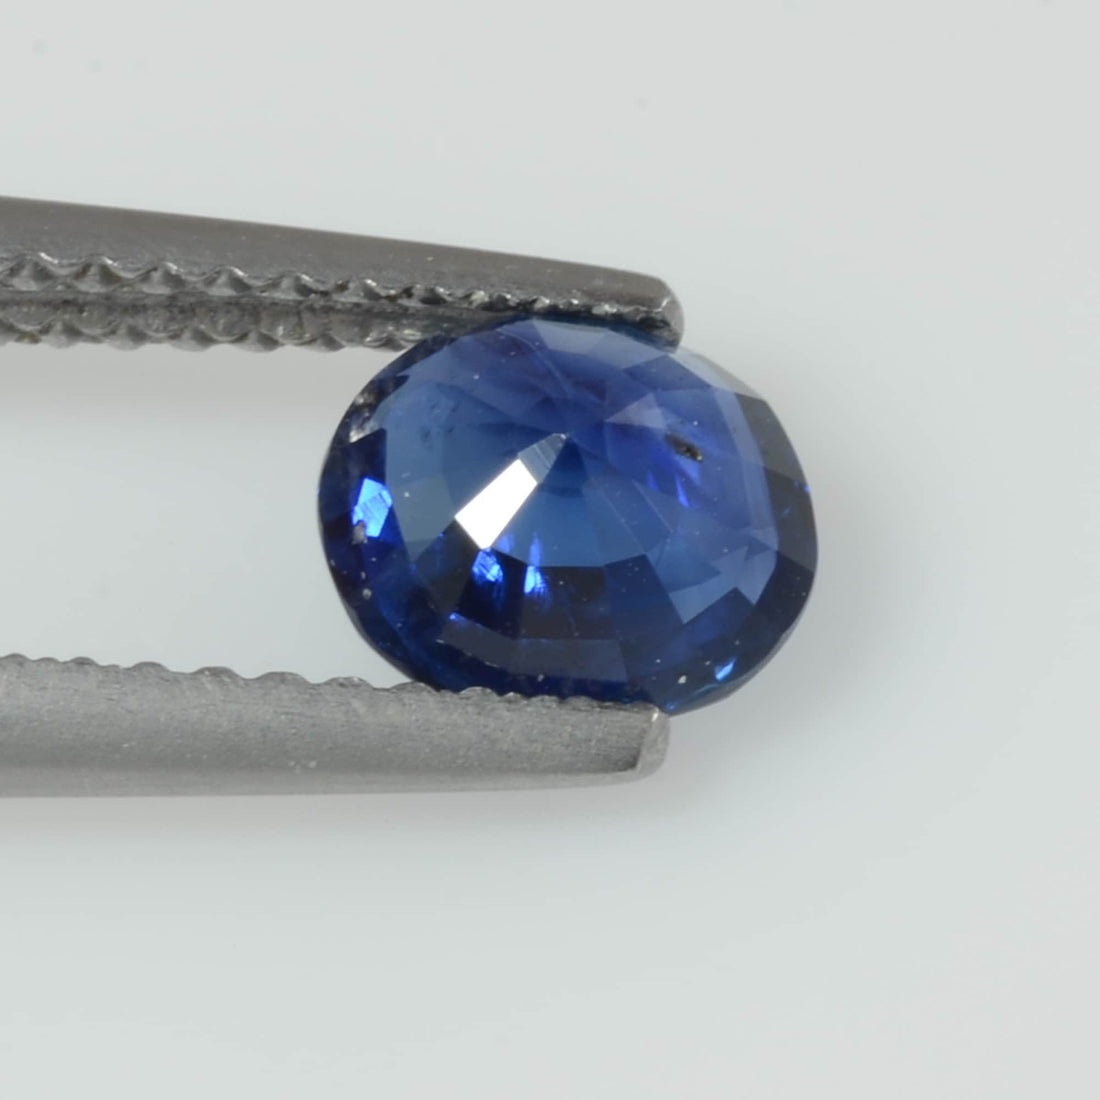 1.16 cts Natural Blue Sapphire Loose Gemstone Oval Cut